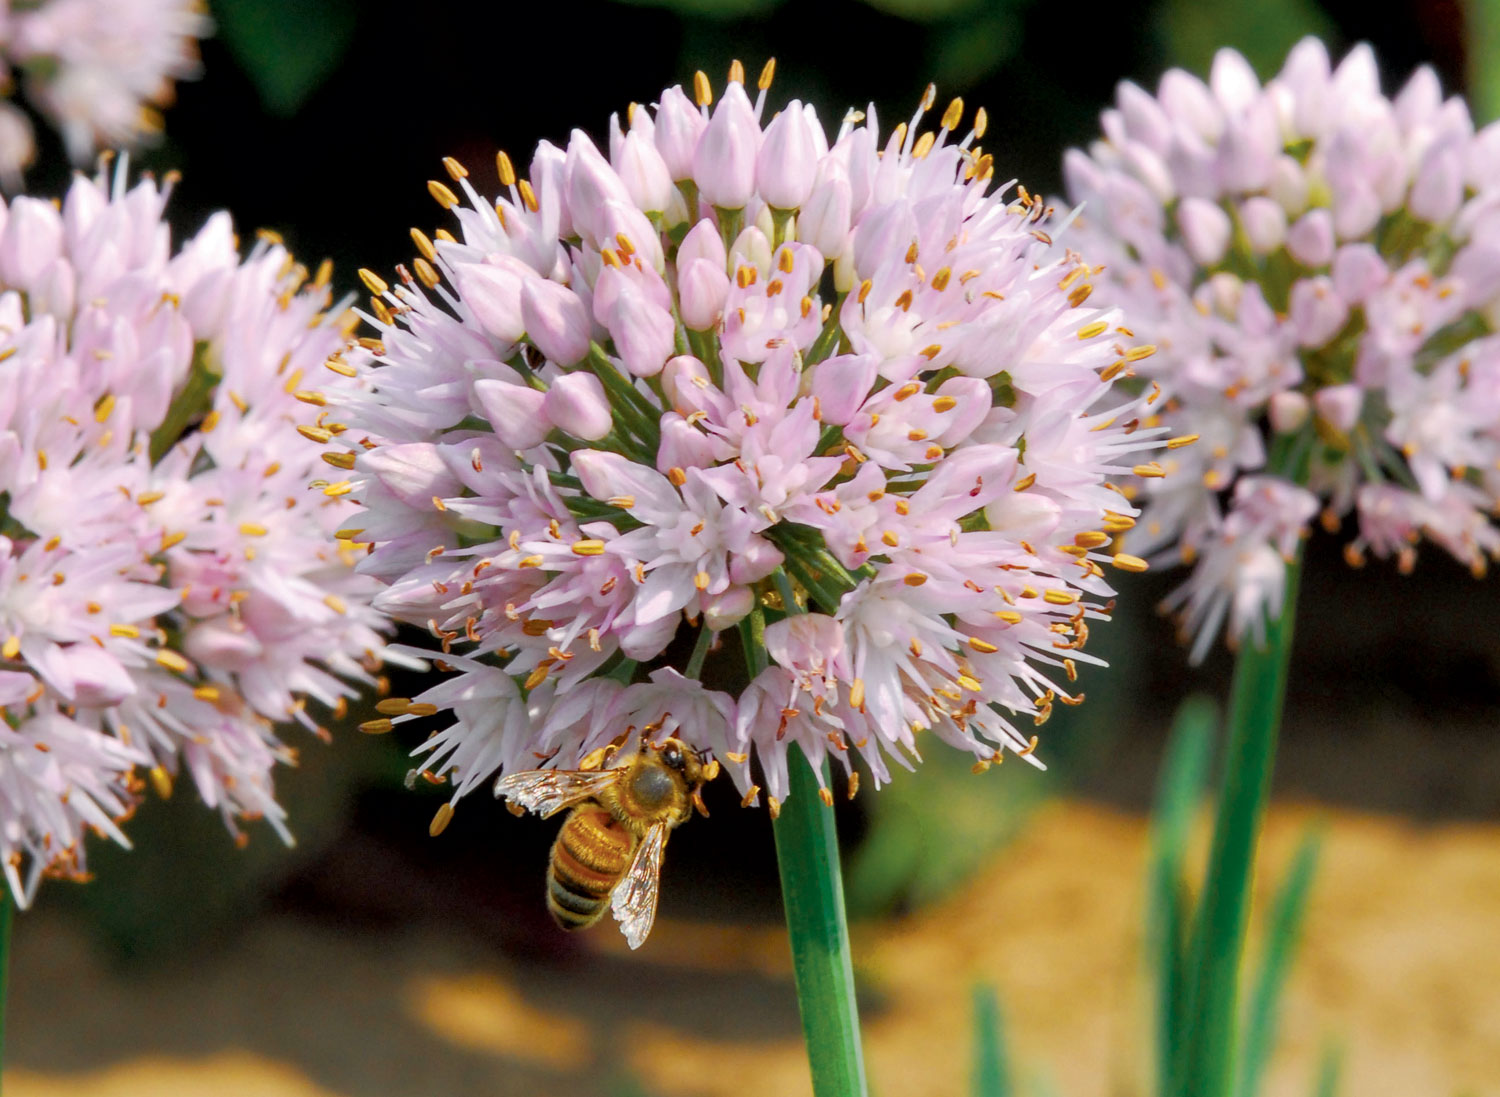 Bee on a chive flower